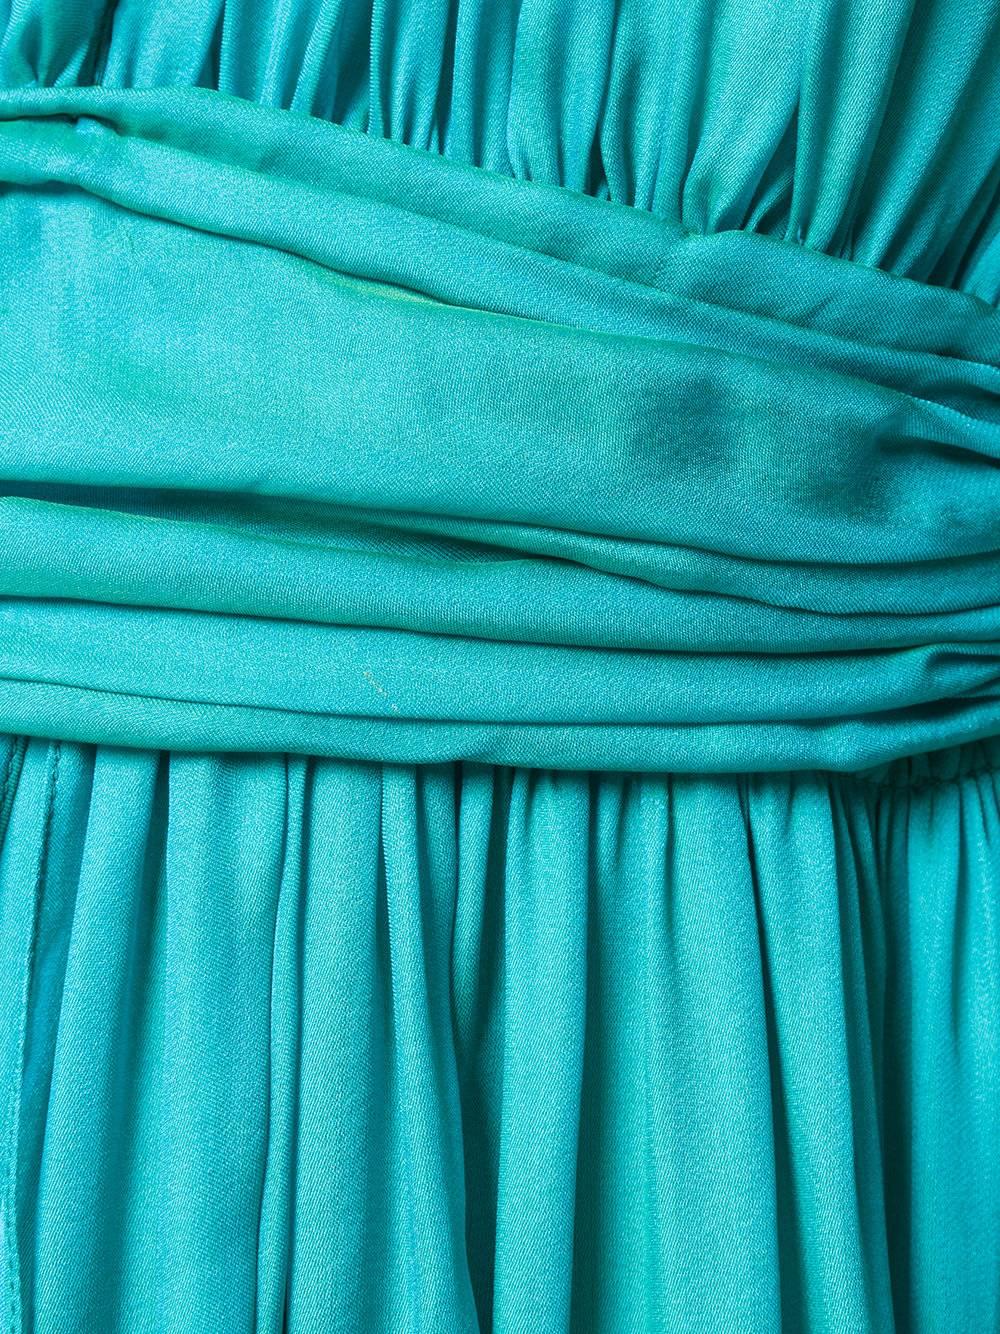 The silk-satin of this Hermès gown is quite mesmerising – its vivid turquoise hue has an iridescent green lustre that moves with the light. This dress has a V-neckline with ruching along the bodice that flows into a floor-sweeping skirt. The back is